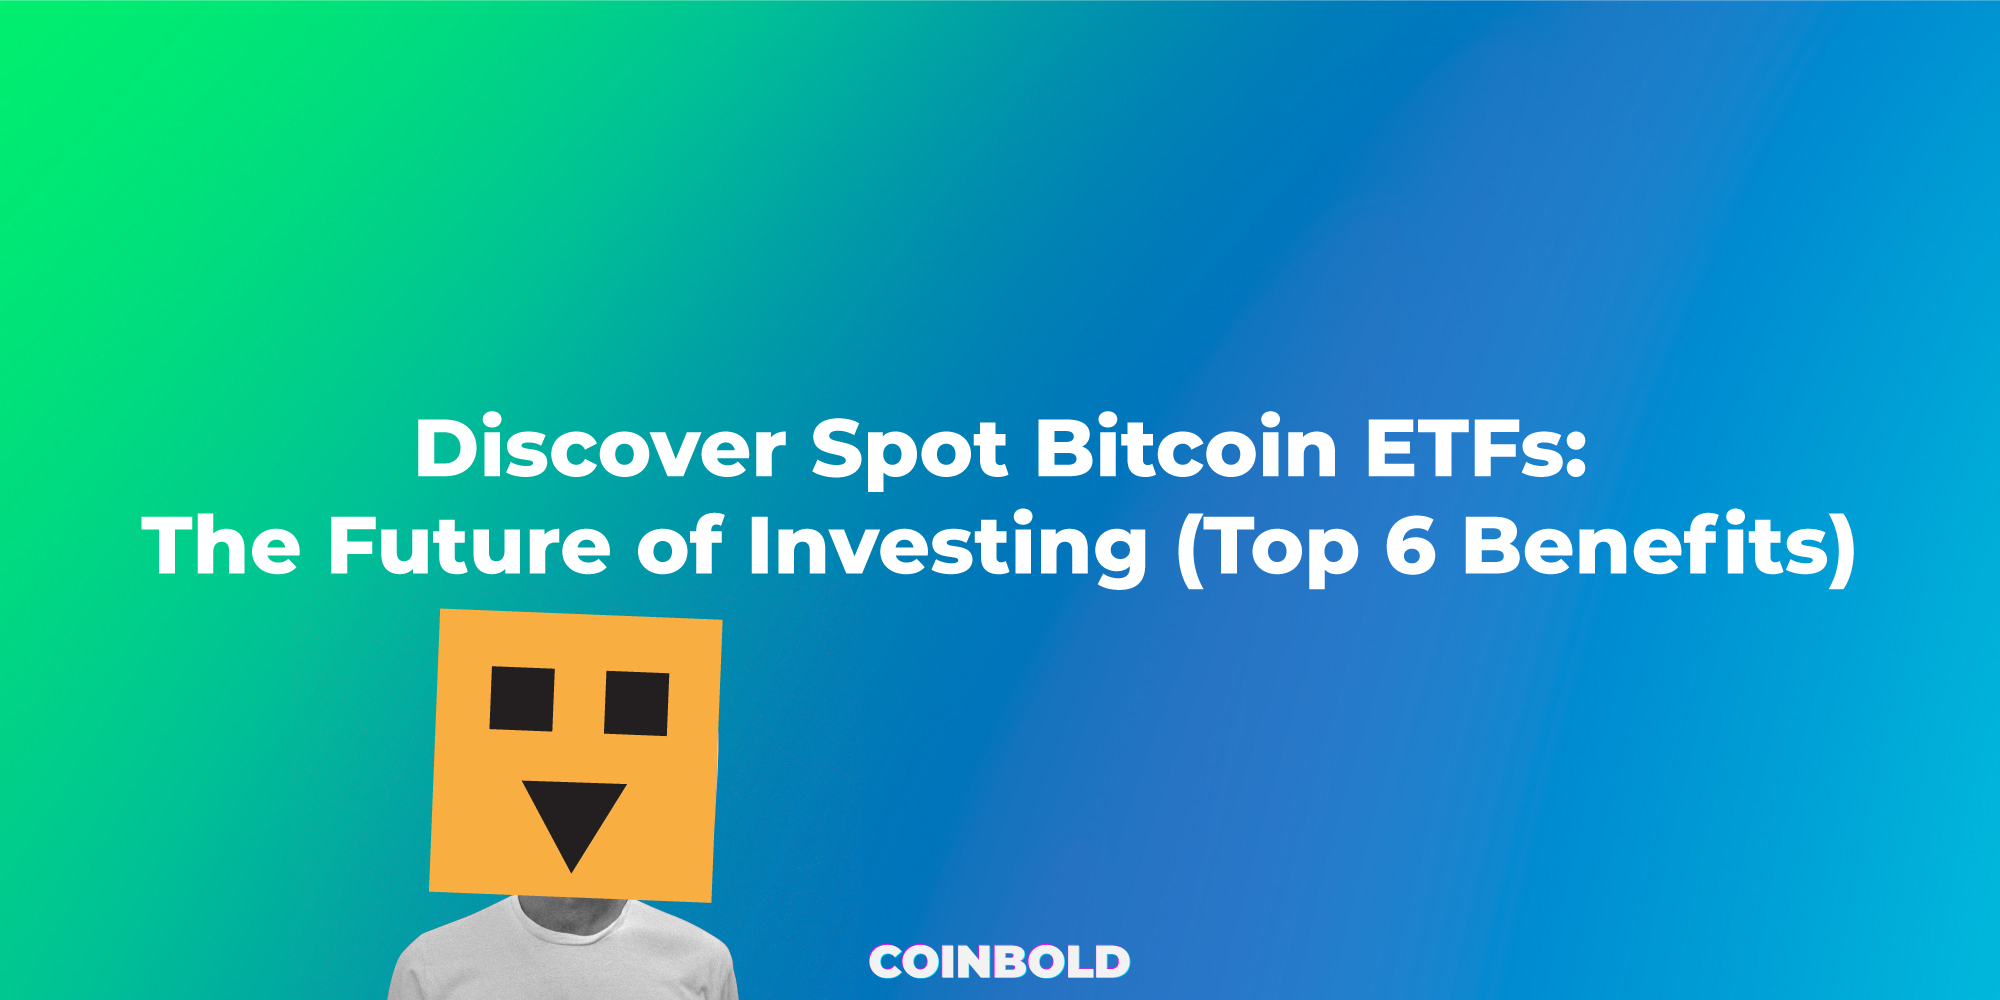 Discover Spot Bitcoin ETFs The Future of Investing (Top 6 Benefits)